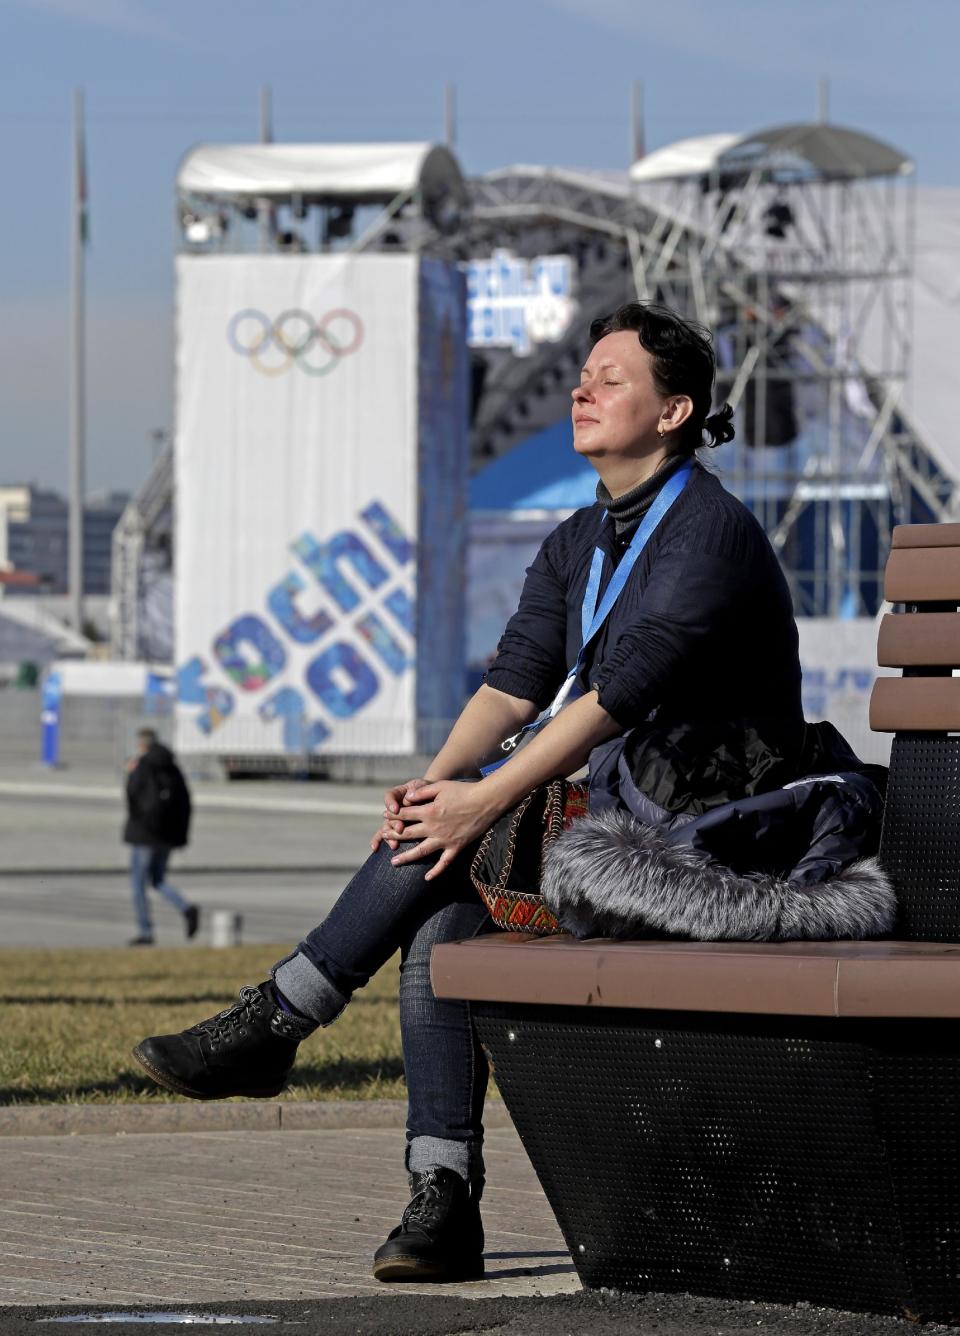 In this Wednesday, Feb. 12, 2014, photo, a woman enjoys some warm sunlight in the Olympic Park at the 2014 Winter Olympics, in Sochi, Russia. Temperatures were near 60 degrees Fahrenheit in Sochi on Wednesday. (AP Photo/Morry Gash)